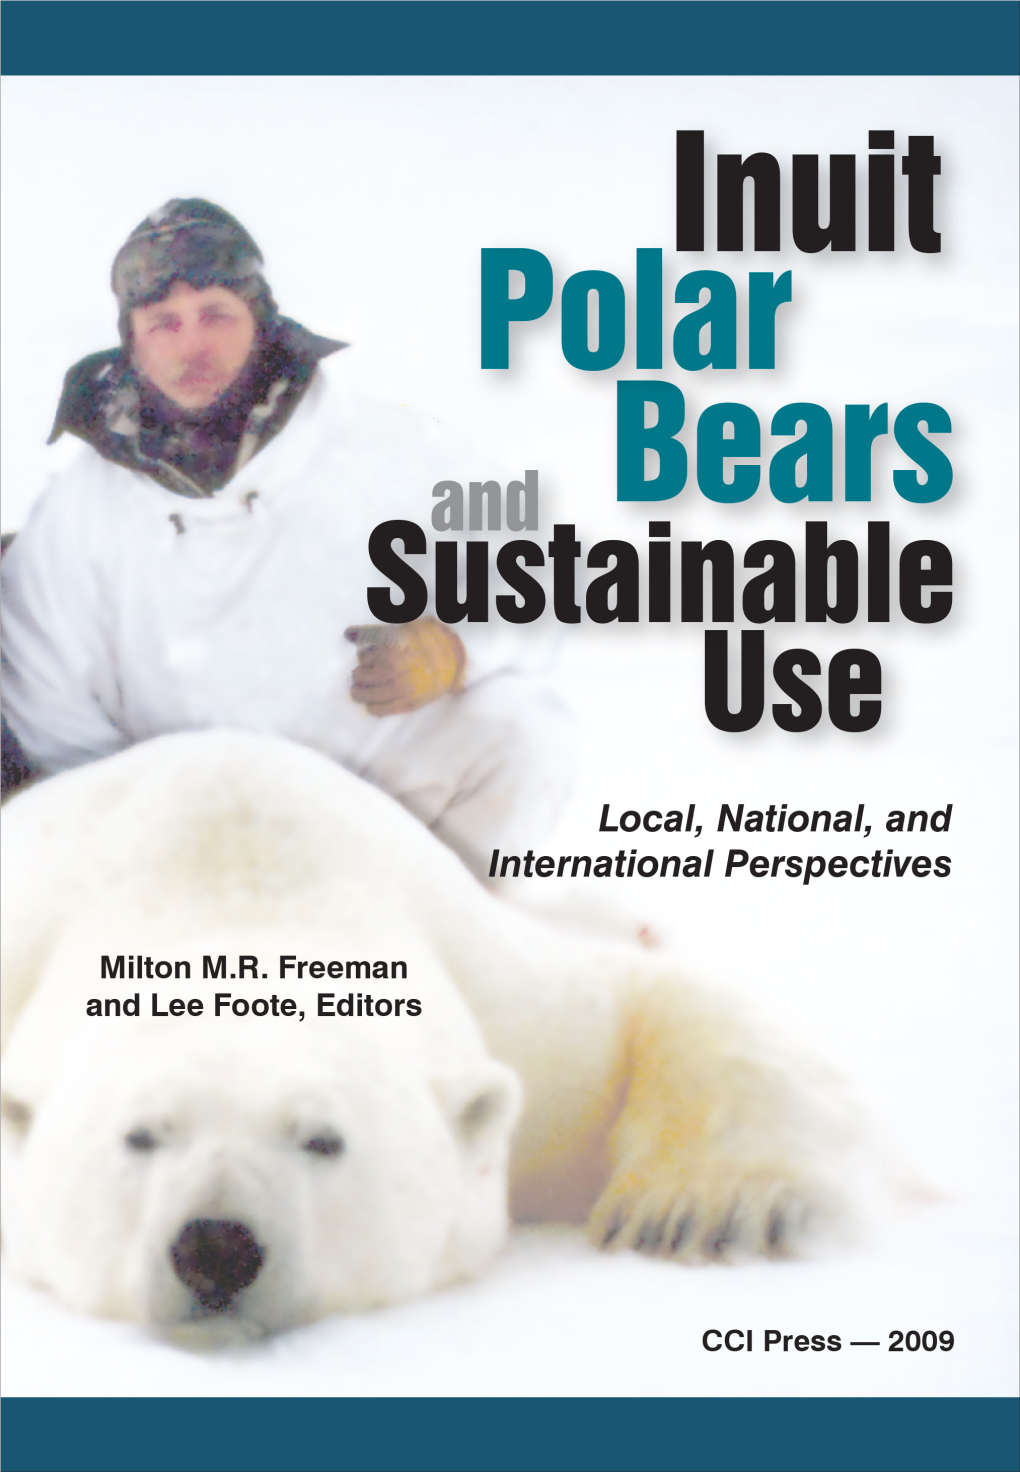 Inuit, Polar Bears, and Sustainable Use